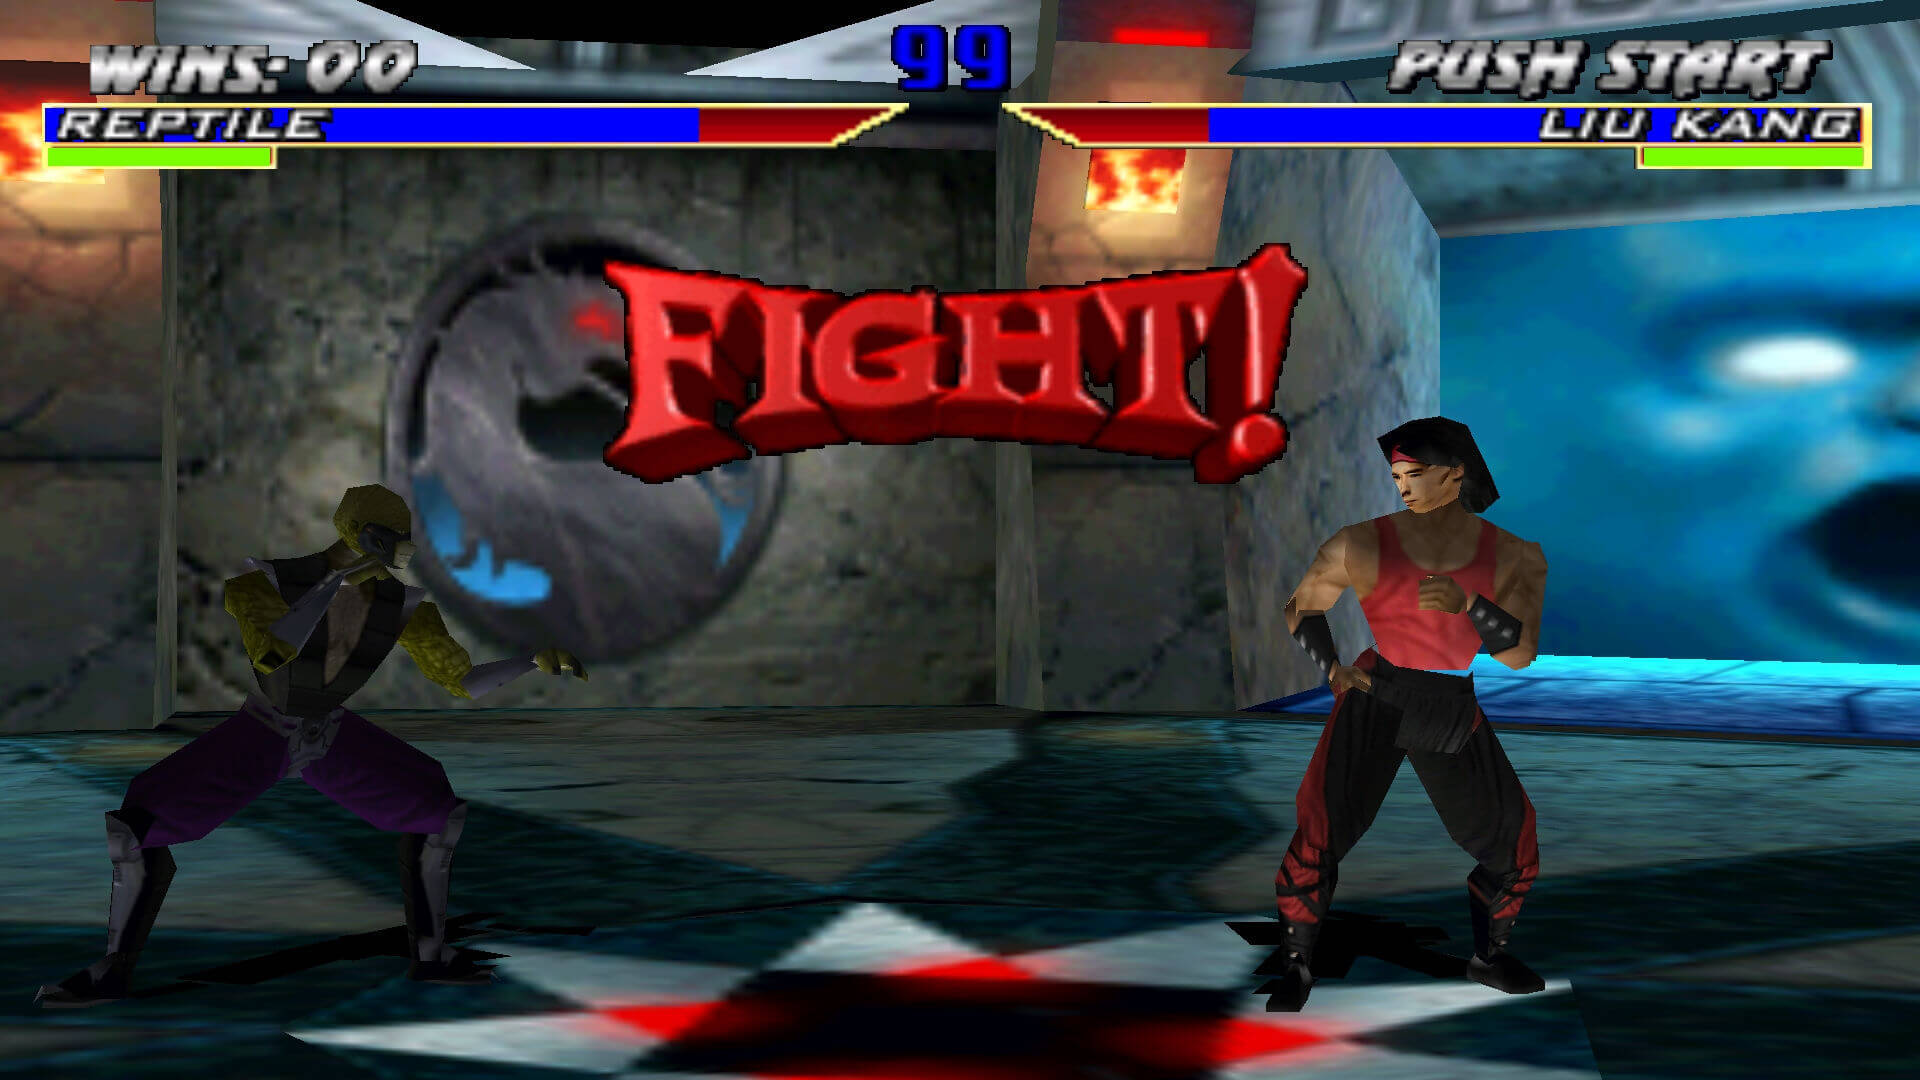 The first 3D Mortal Kombat game, Mortal Kombat 4, is now available on